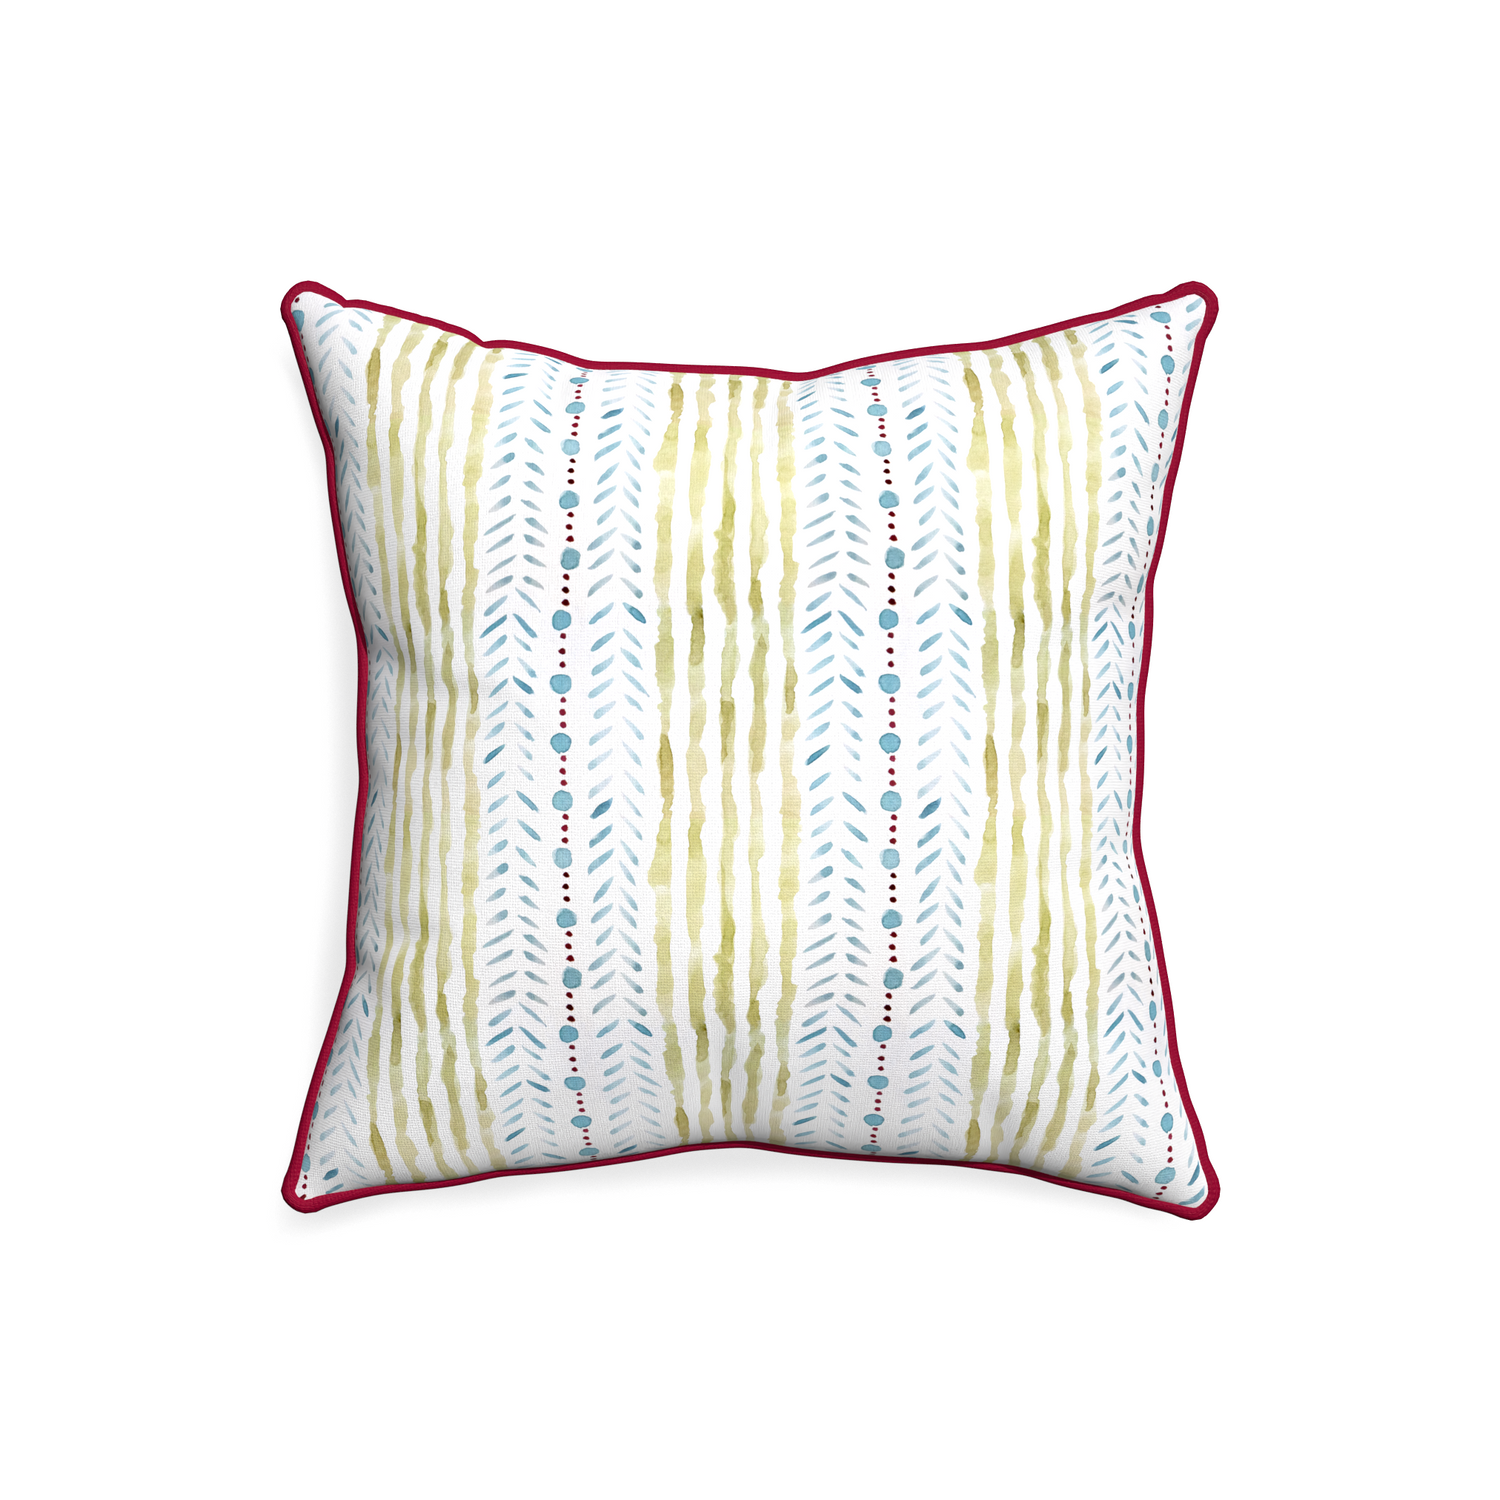 20-square julia custom blue & green stripedpillow with raspberry piping on white background